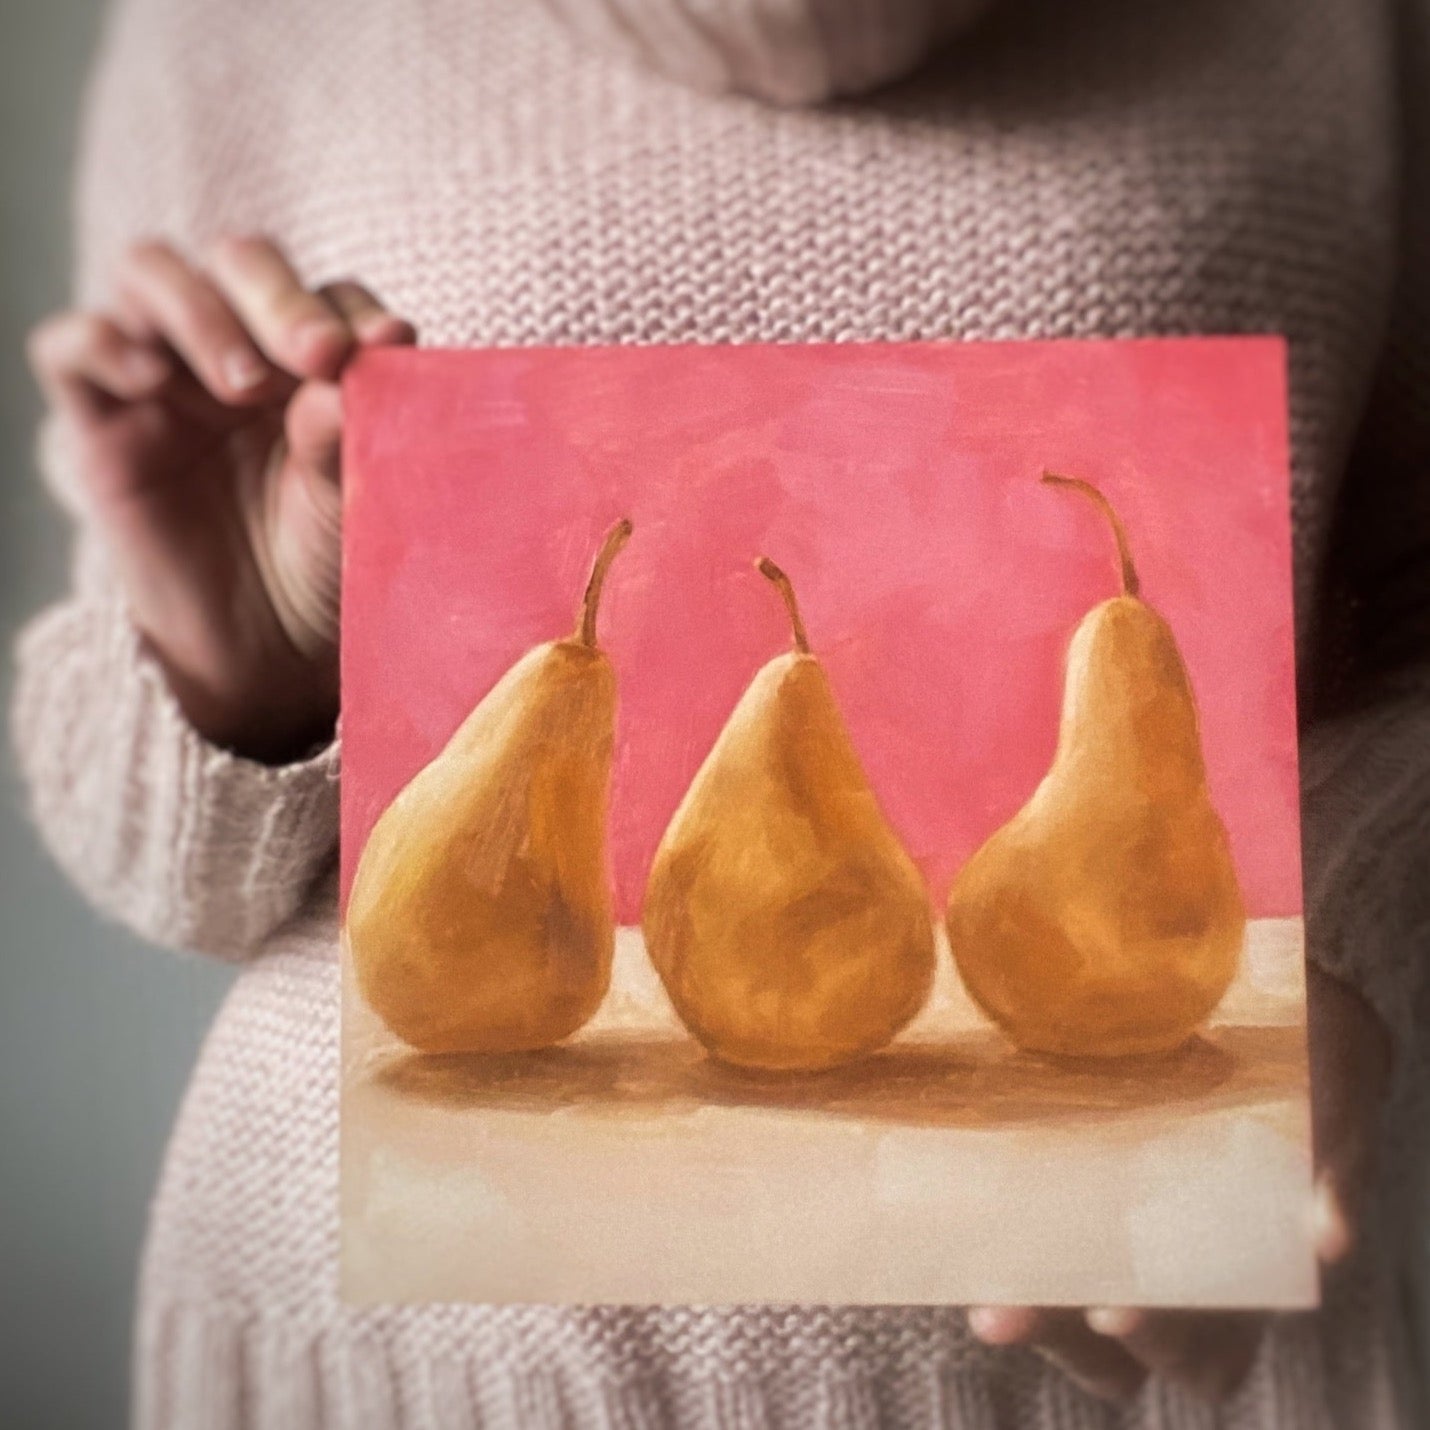 image of a person holding an original oil paintings of three beurre Bosc pears on a warm pink and creamy background